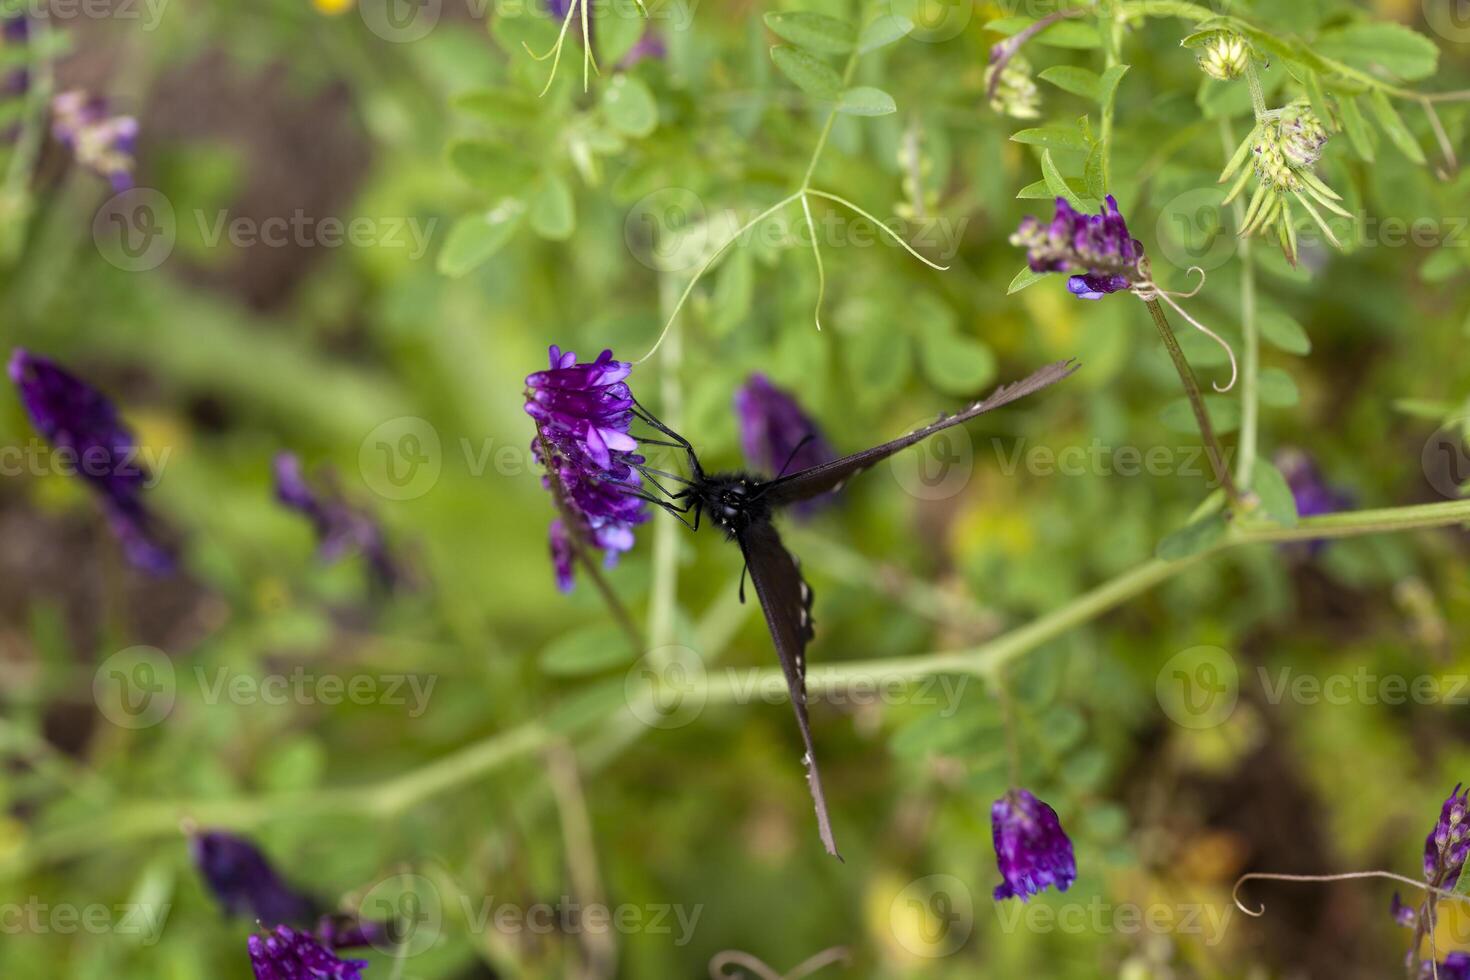 Black Butterfly Drinking from Purple Flower Outdoors photo